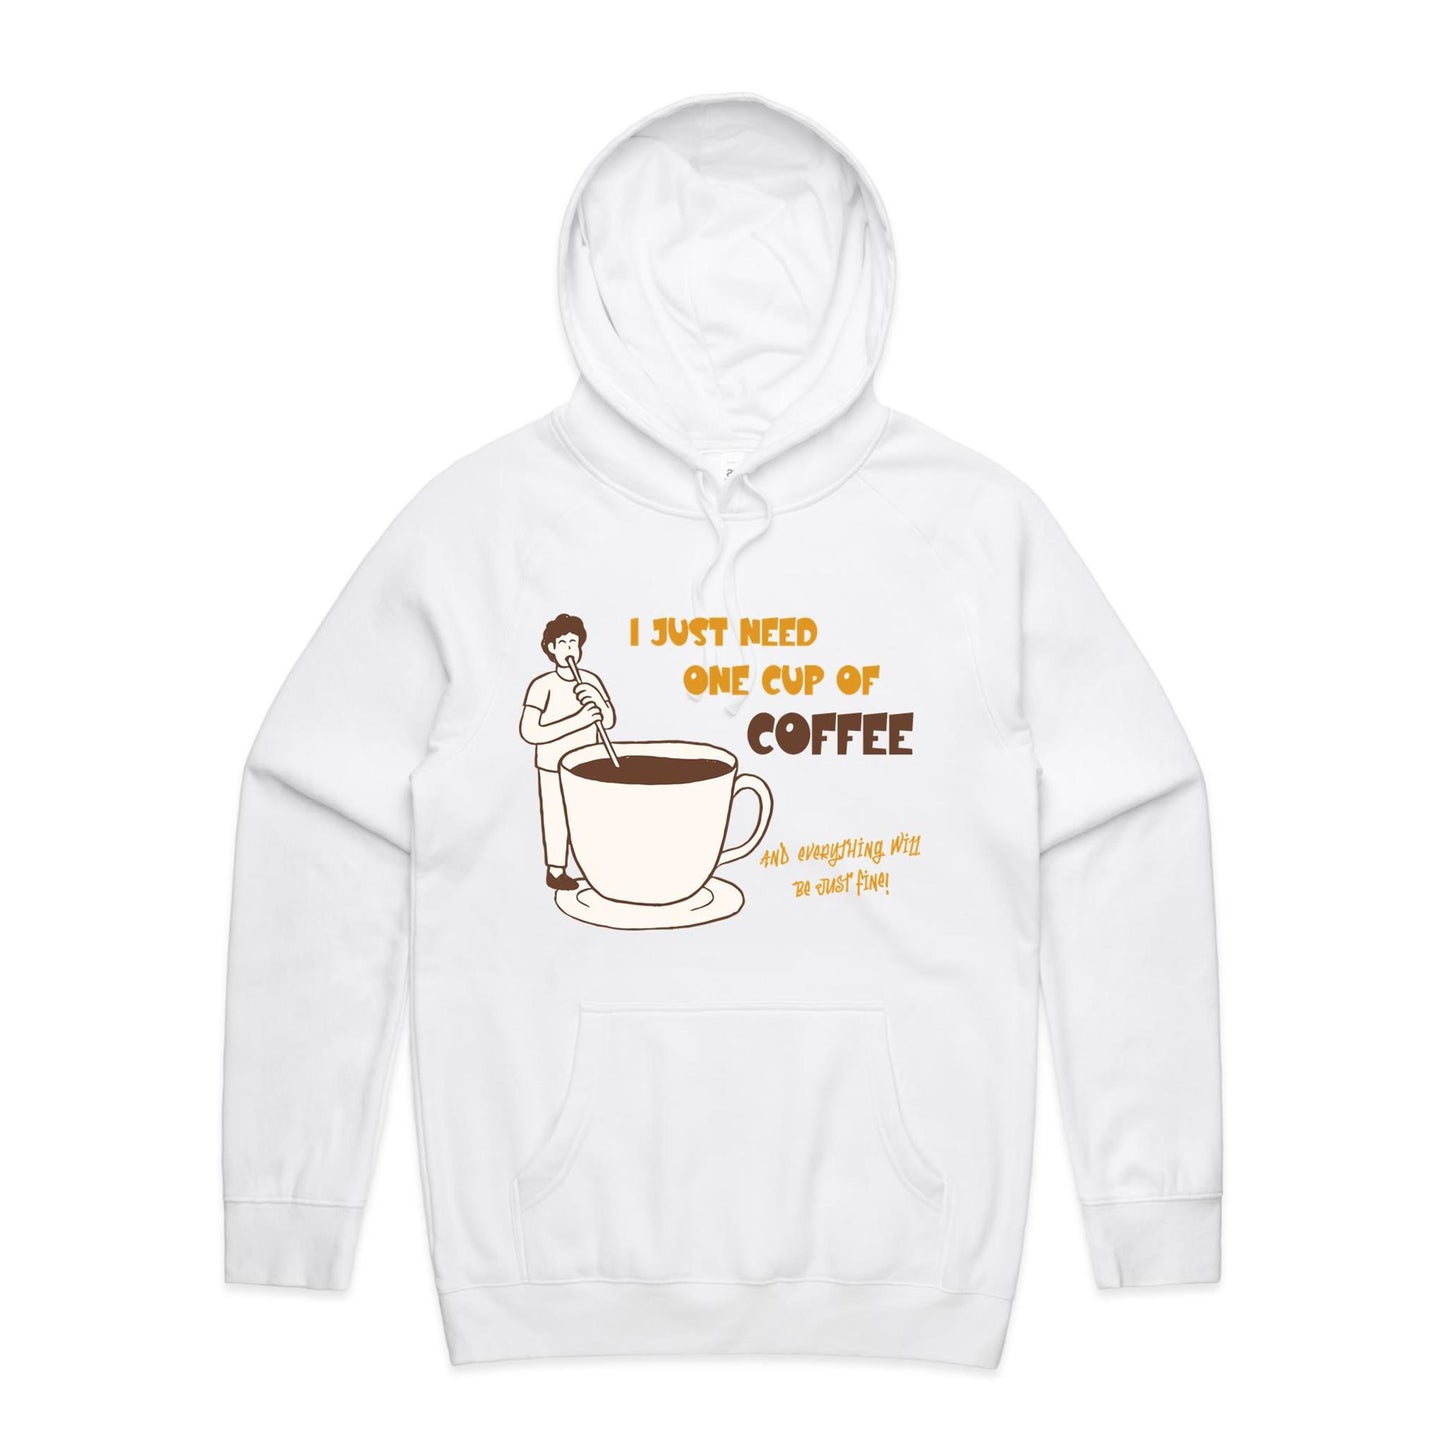 I Just Need One Cup Of Coffee And Everything Will Be Just Fine - Supply Hood White Mens Supply Hoodie Coffee